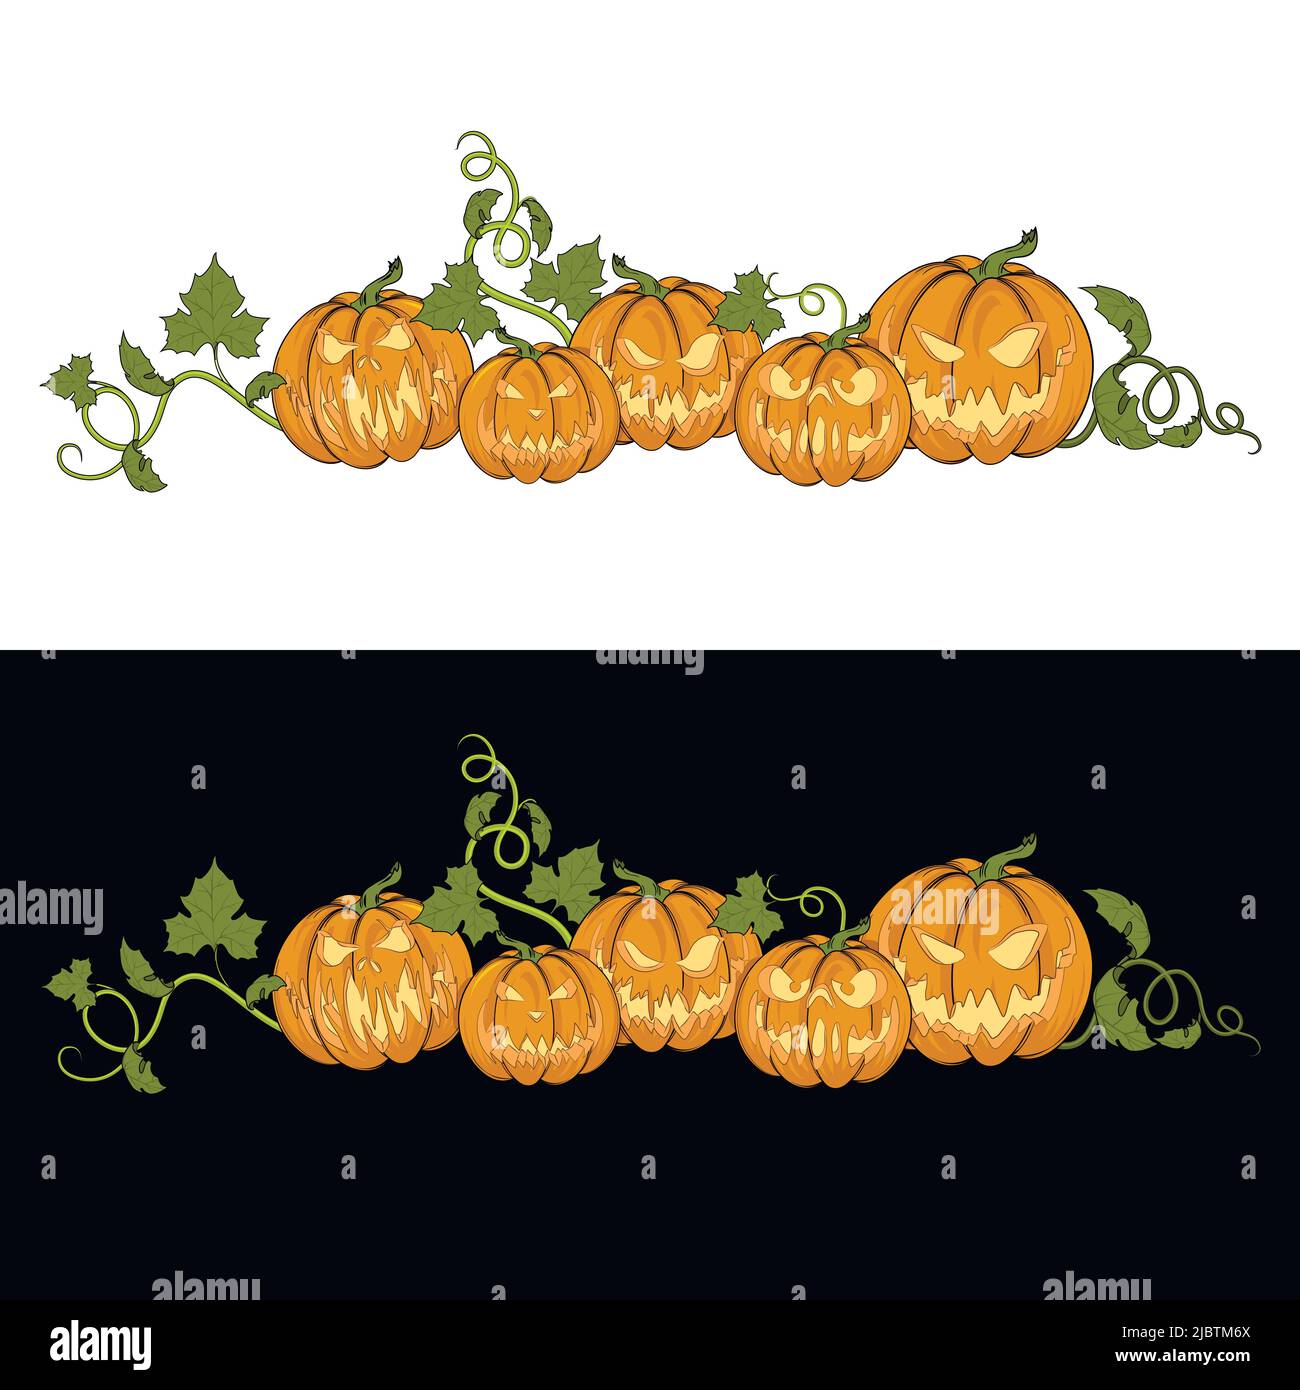 Halloween. Vector illustration of pumpkins for cards, banners, stickers, flyers. Colored set of pumpkins on a white and black background. Stock Vector